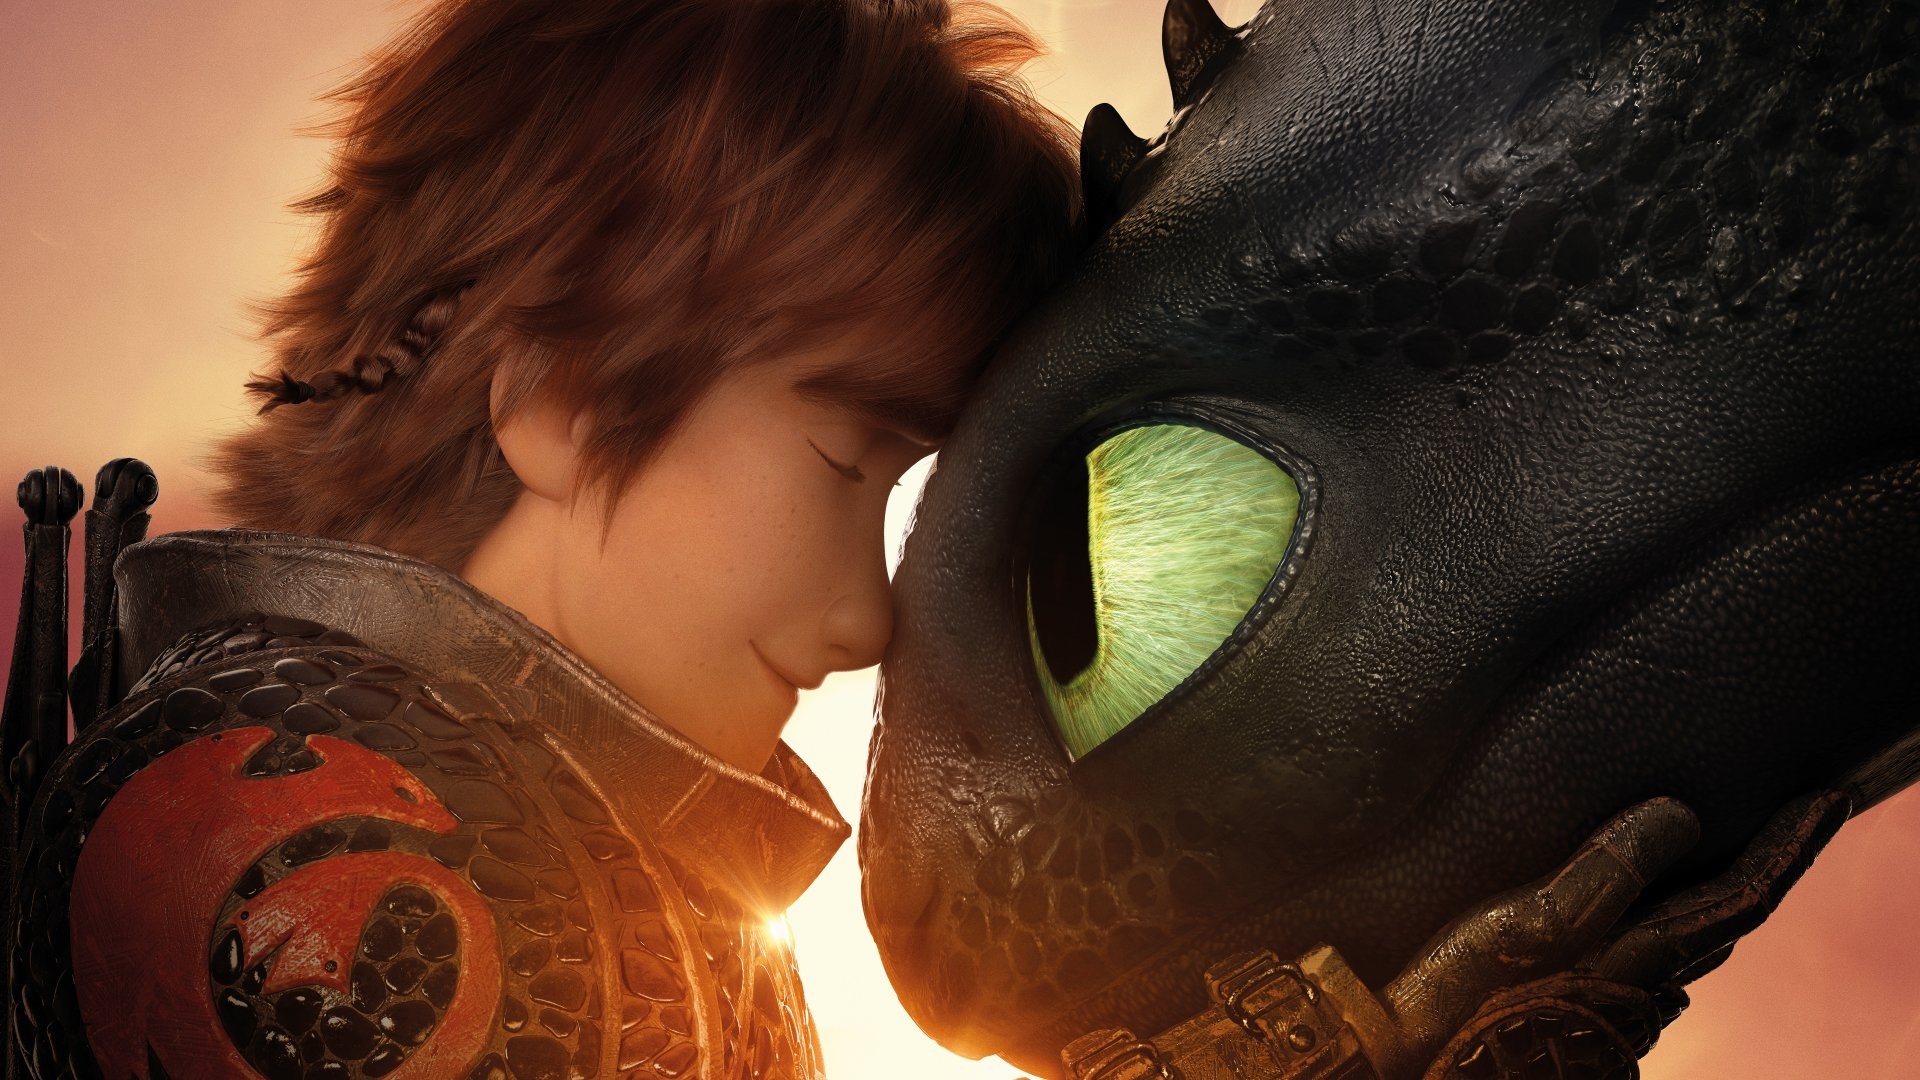 How to Train Your Dragon: The Hidden World (Animation), Stunning wallpapers, Majestic dragons, Incredible visuals, 1920x1080 Full HD Desktop